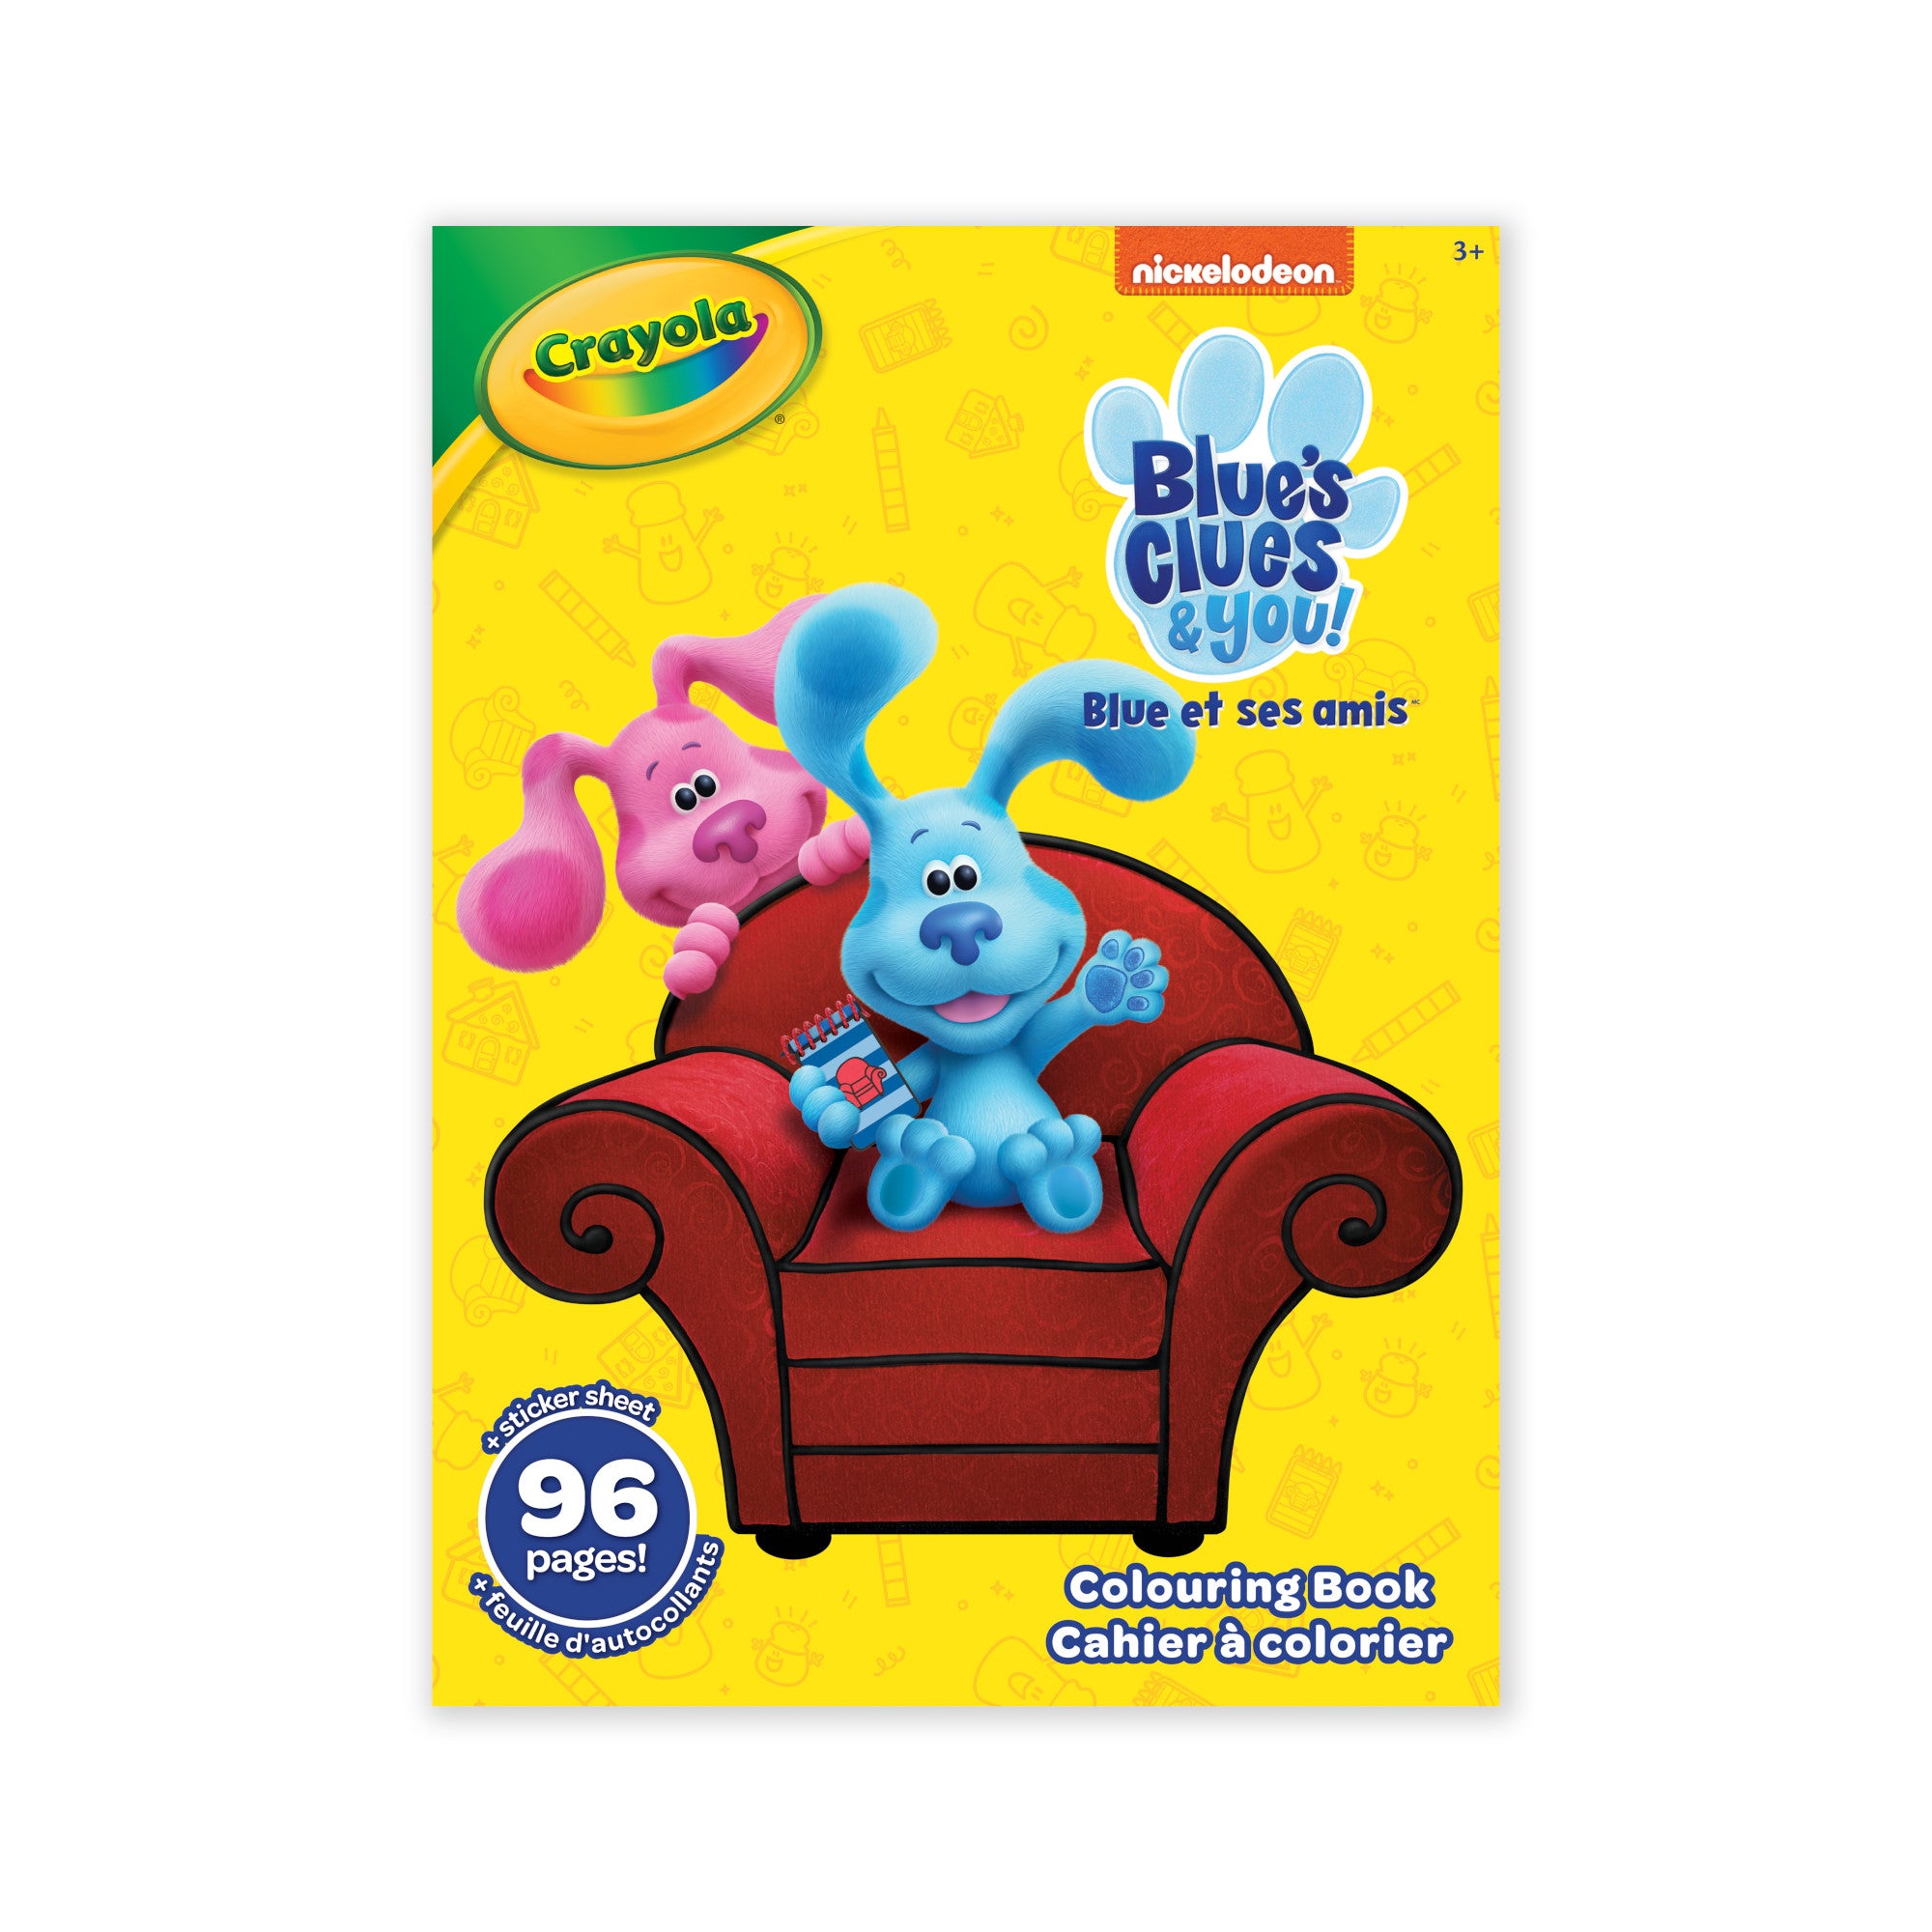 Crayola 96 Page Colouring Book, Blue's Clues & You